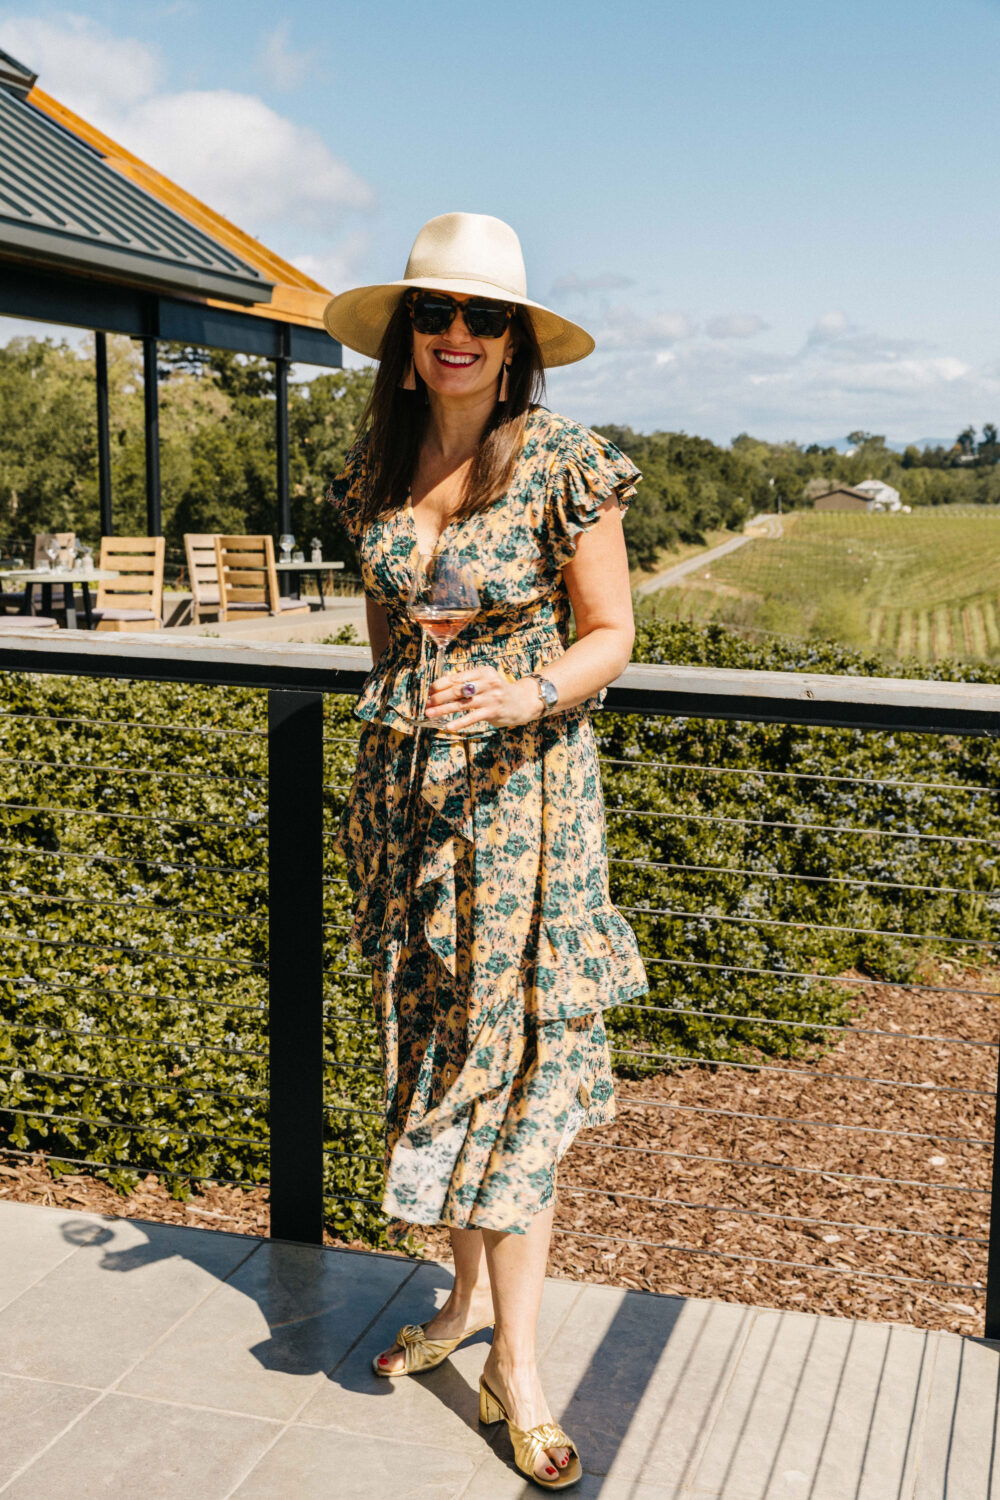 The JetSetting Fashionista - JetSet with me to experience the best Wine ...